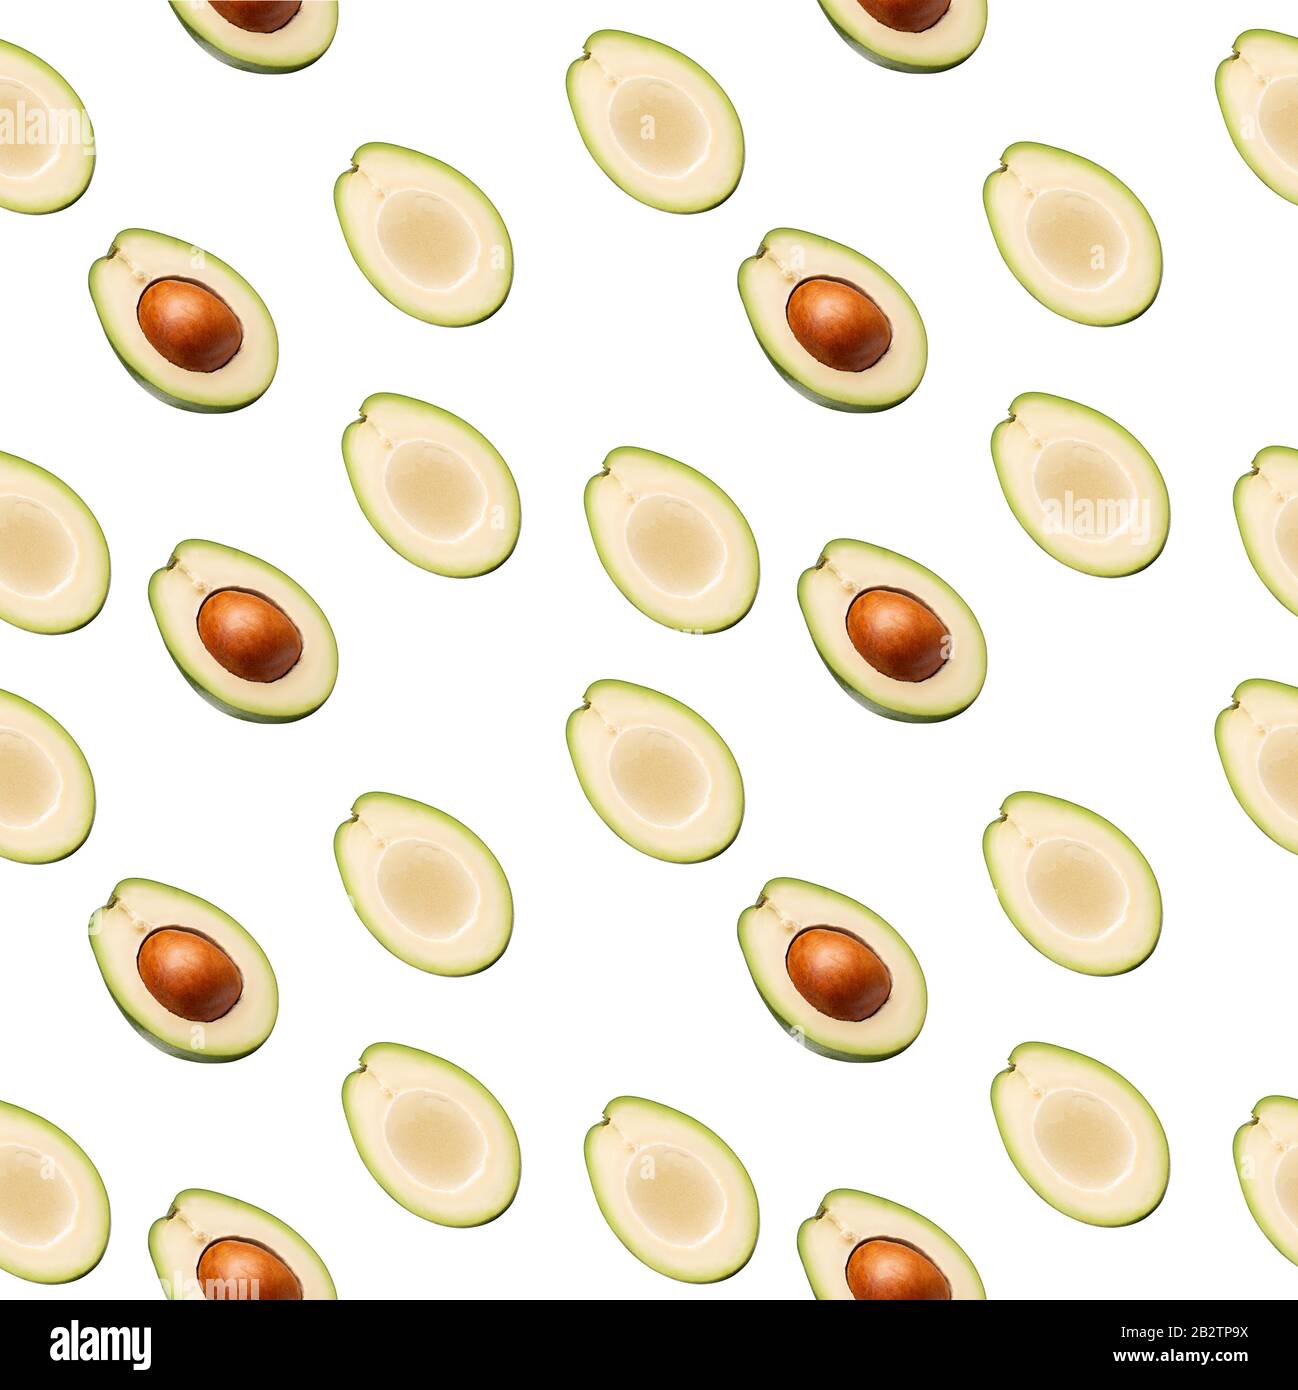 pattern with avocado slices on a white background. Stock Photo